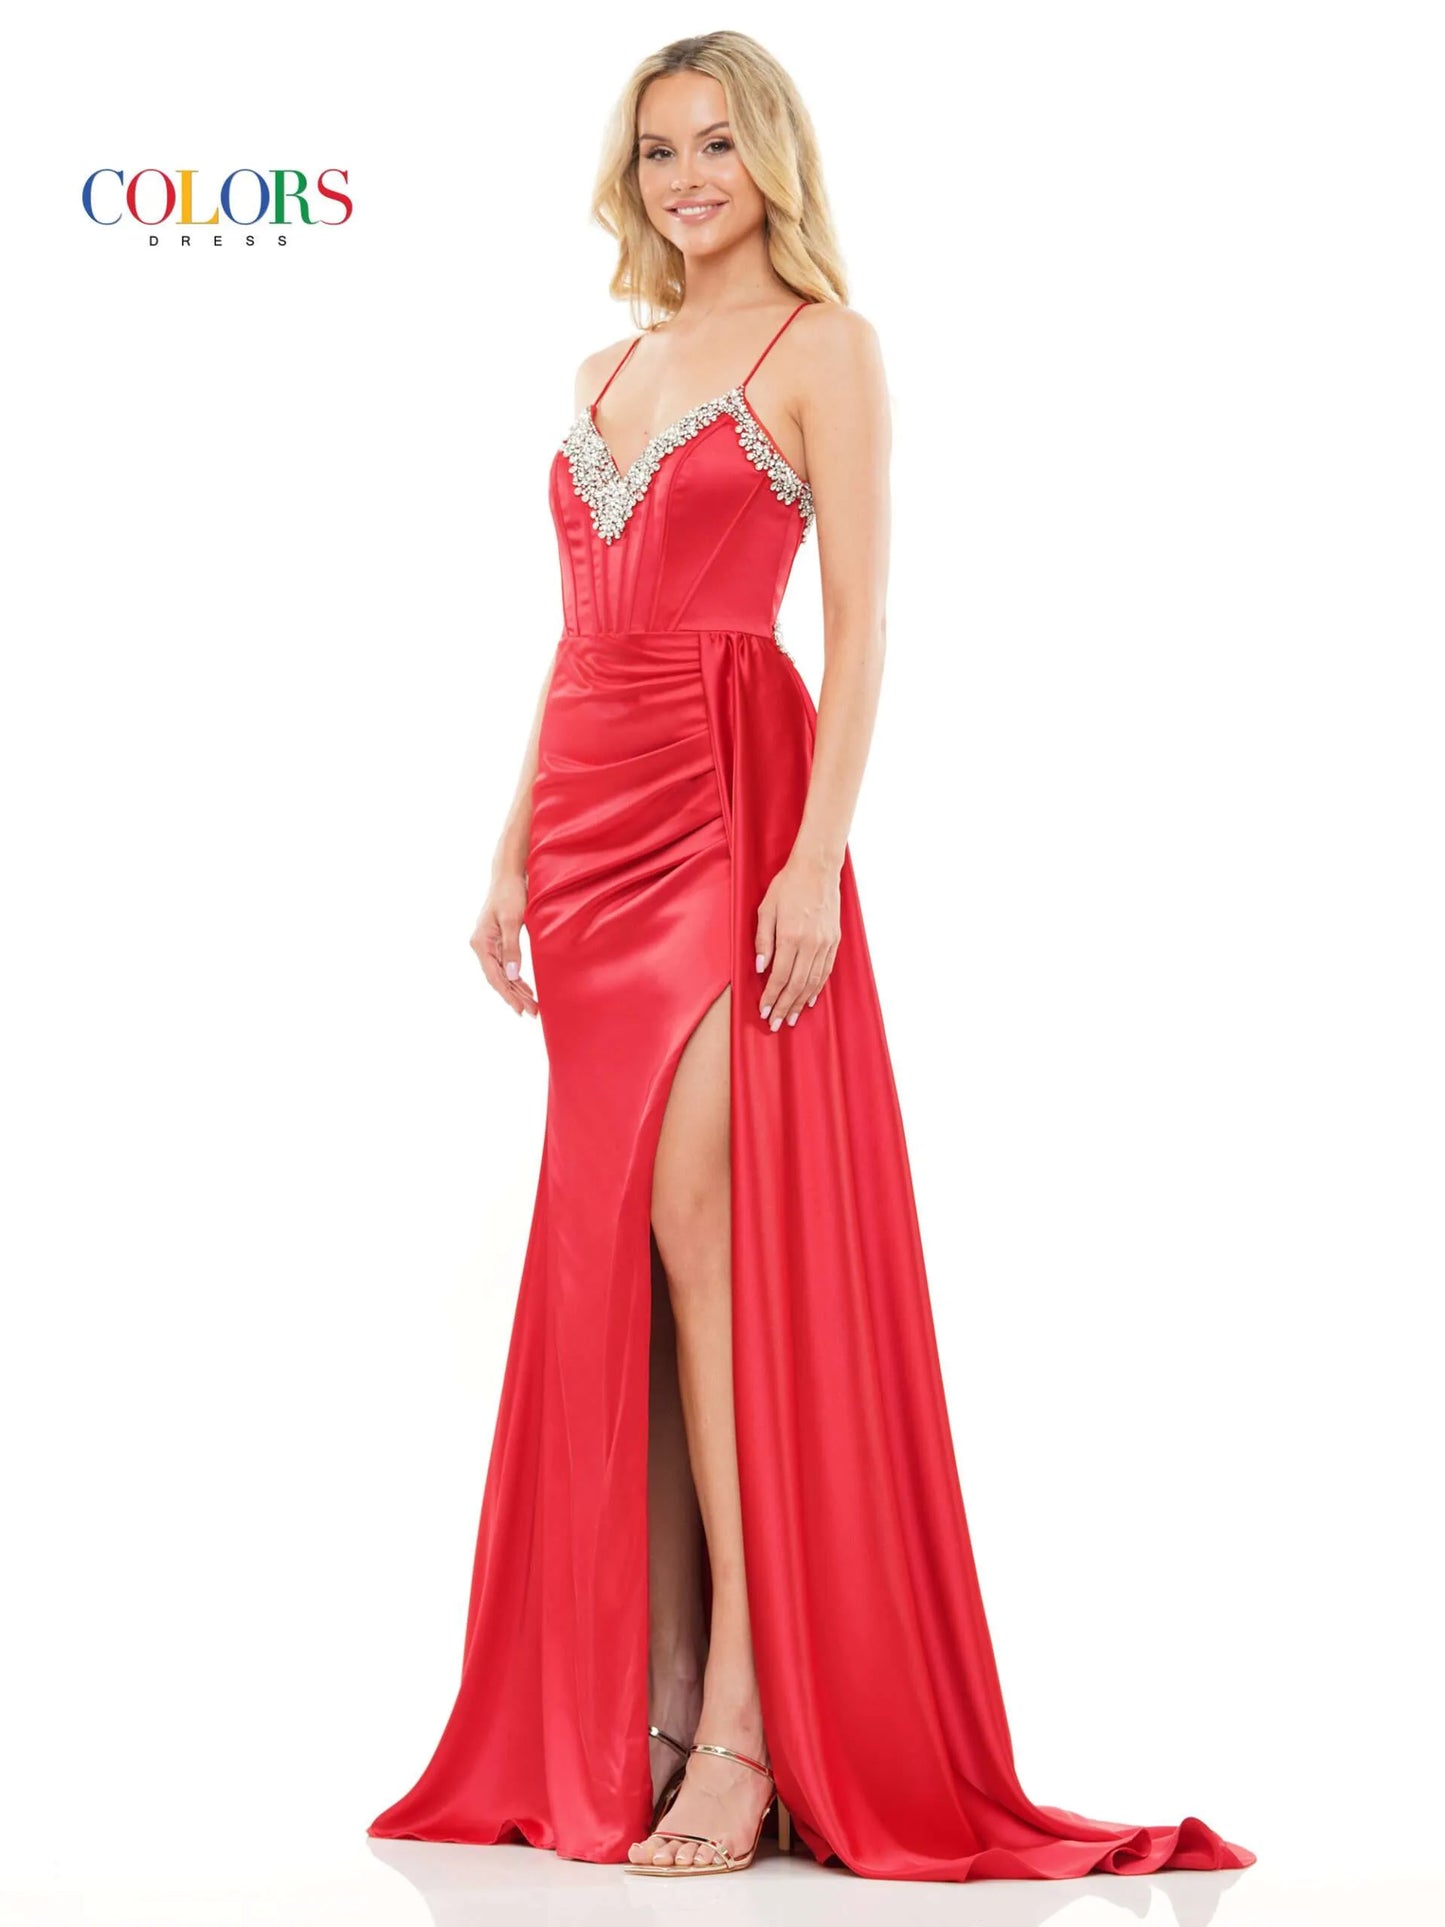 Experience elegance and glamour in this Colors Dress 3305. The stunning beaded corset V neck adds a touch of sparkle, while the satin fabric provides a luxurious feel. The high slit and side overskirt along with the ruched back create a flattering silhouette. Perfect for formal events and pageants, this dress exudes confidence and sophistication. Prom  Sizes: 0-22  Colors: Black, Red, Royal, Hot Pink